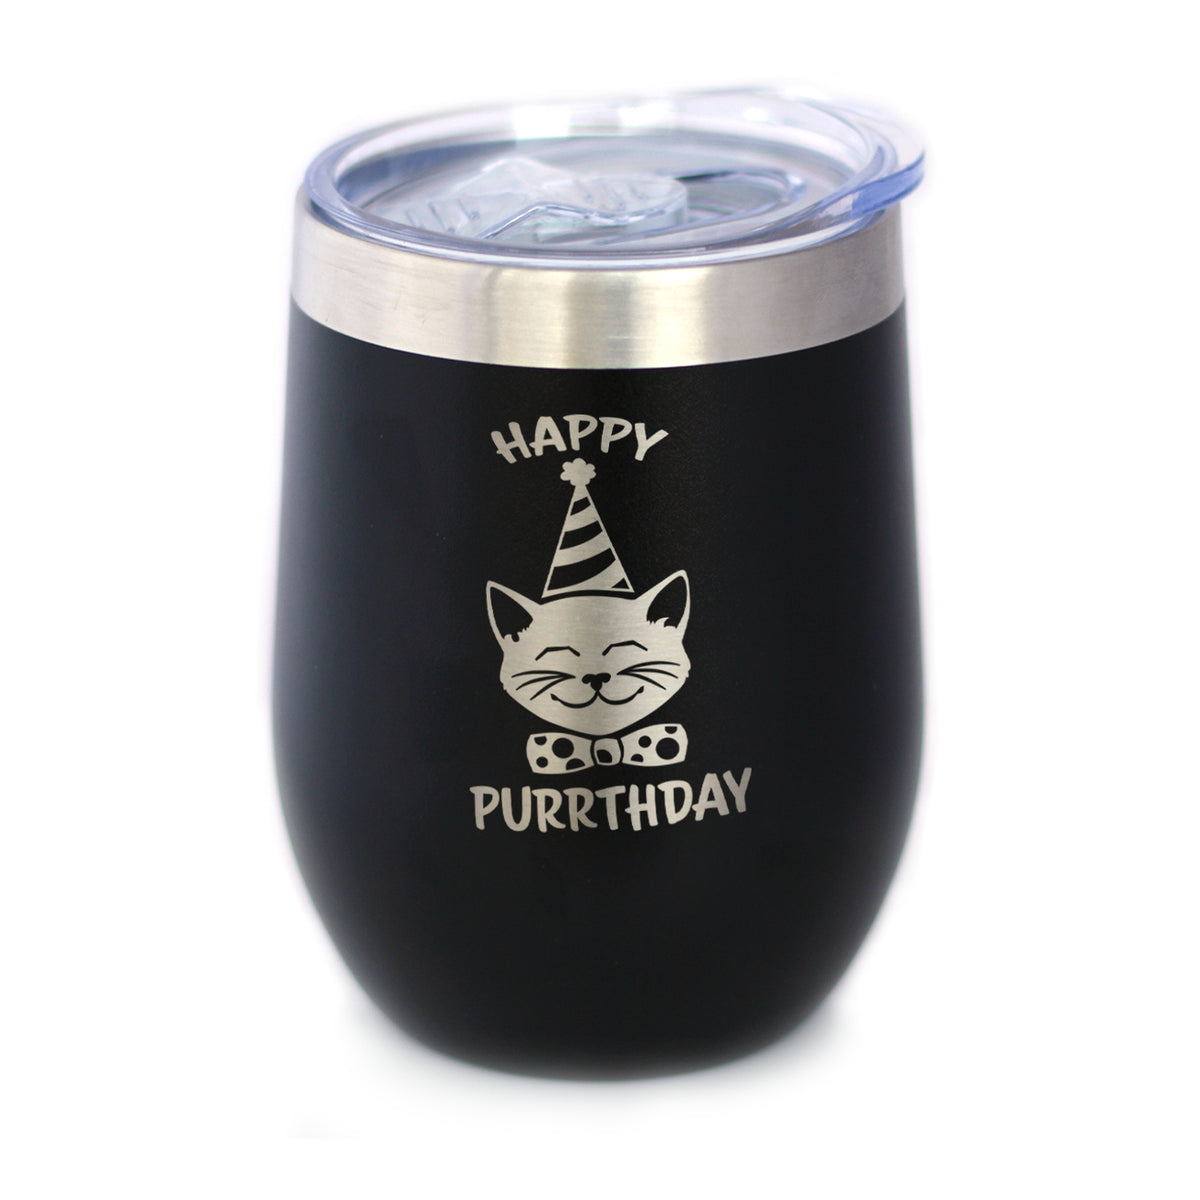 Happy Purrthday - Wine Tumbler Glass with Sliding Lid - Stainless Steel Insulated Mug - Unique Cat Birthday Gifts for Women and Men